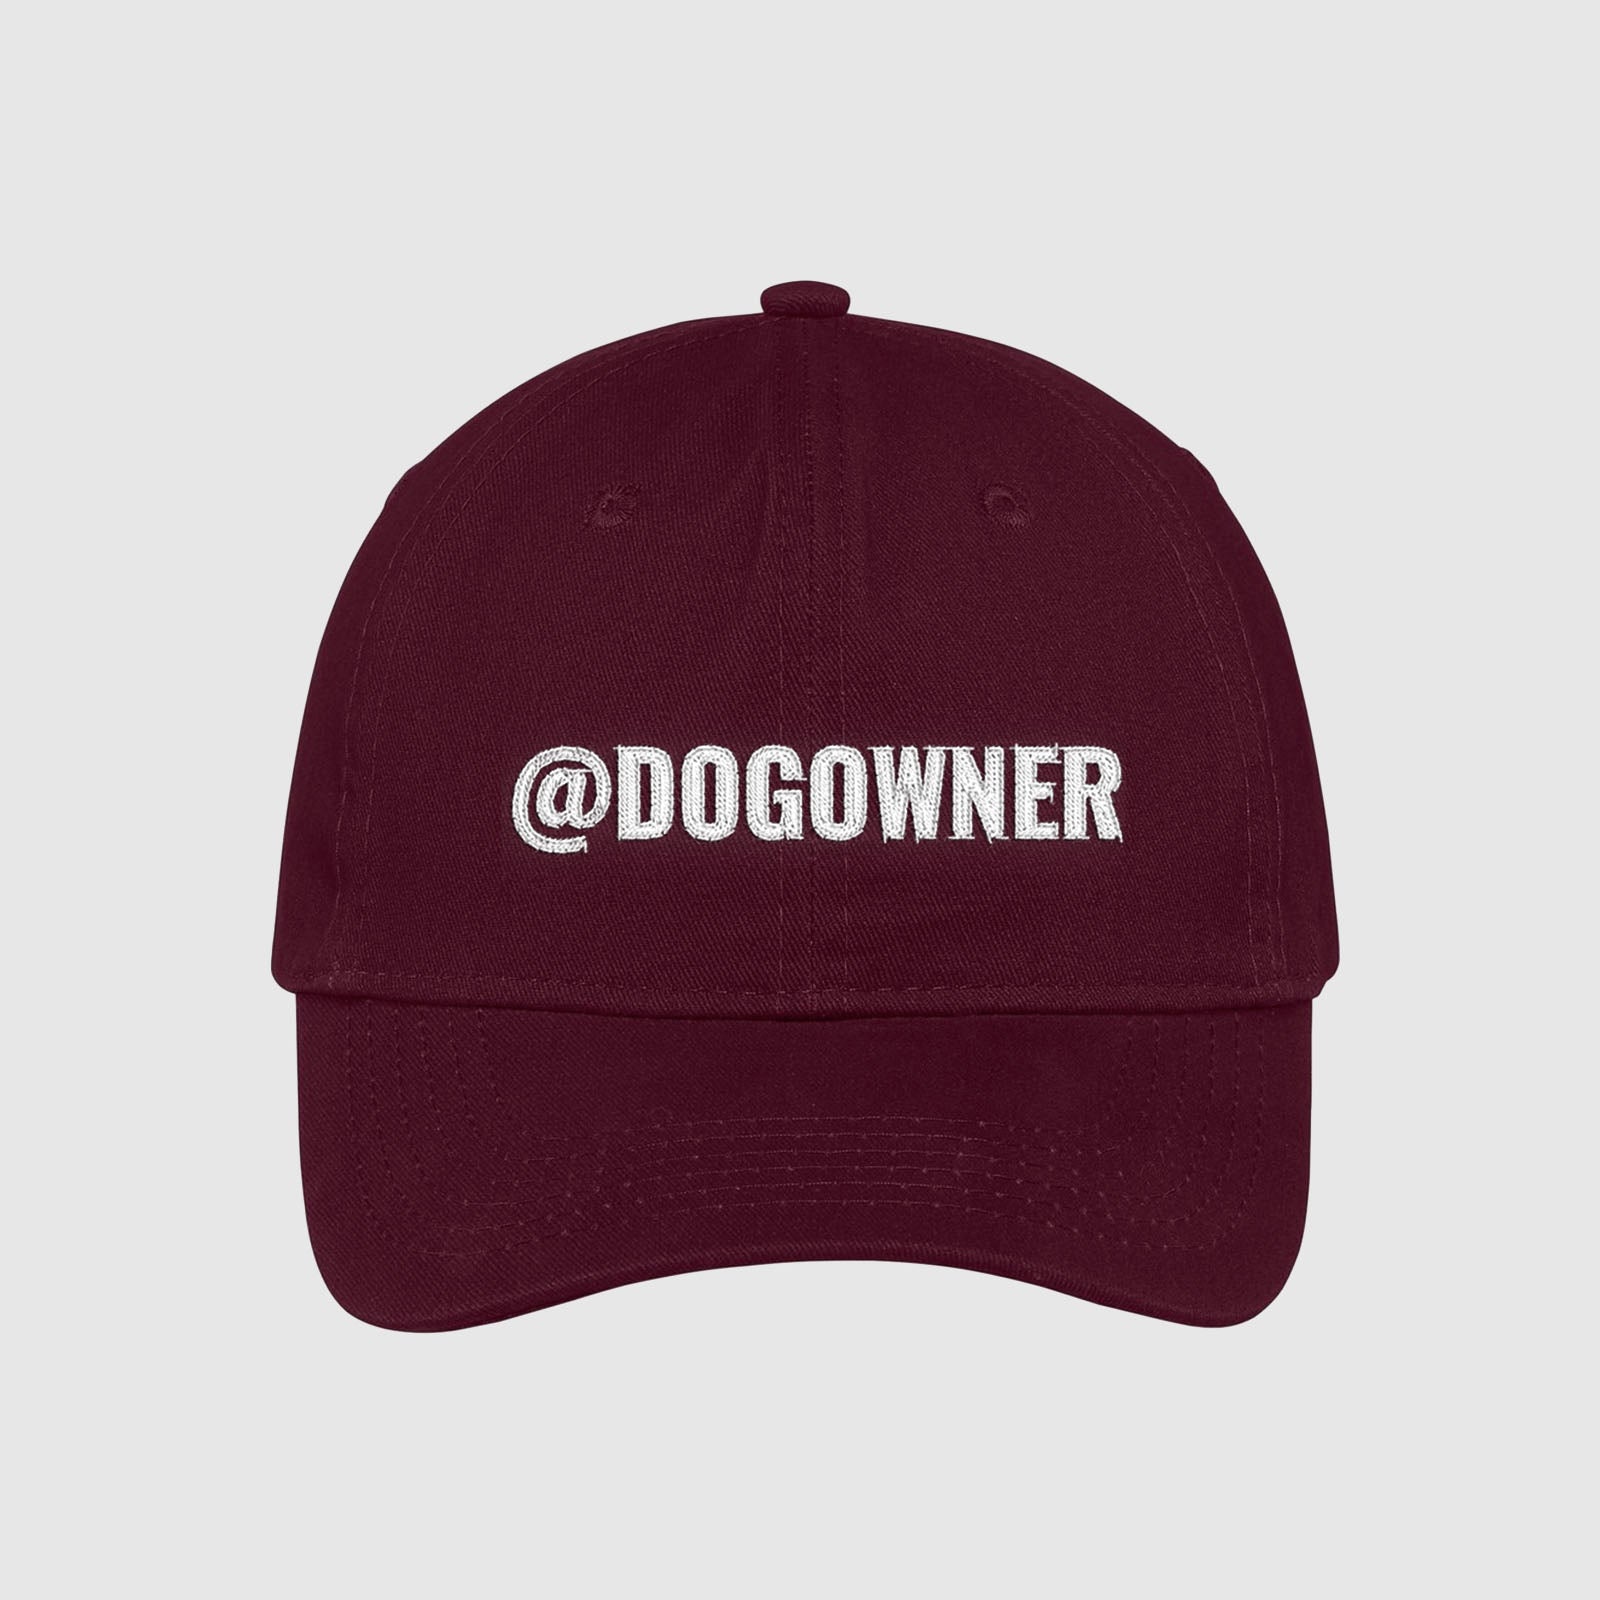 Maroon customizable hat with your social media handle embroidered on the front.